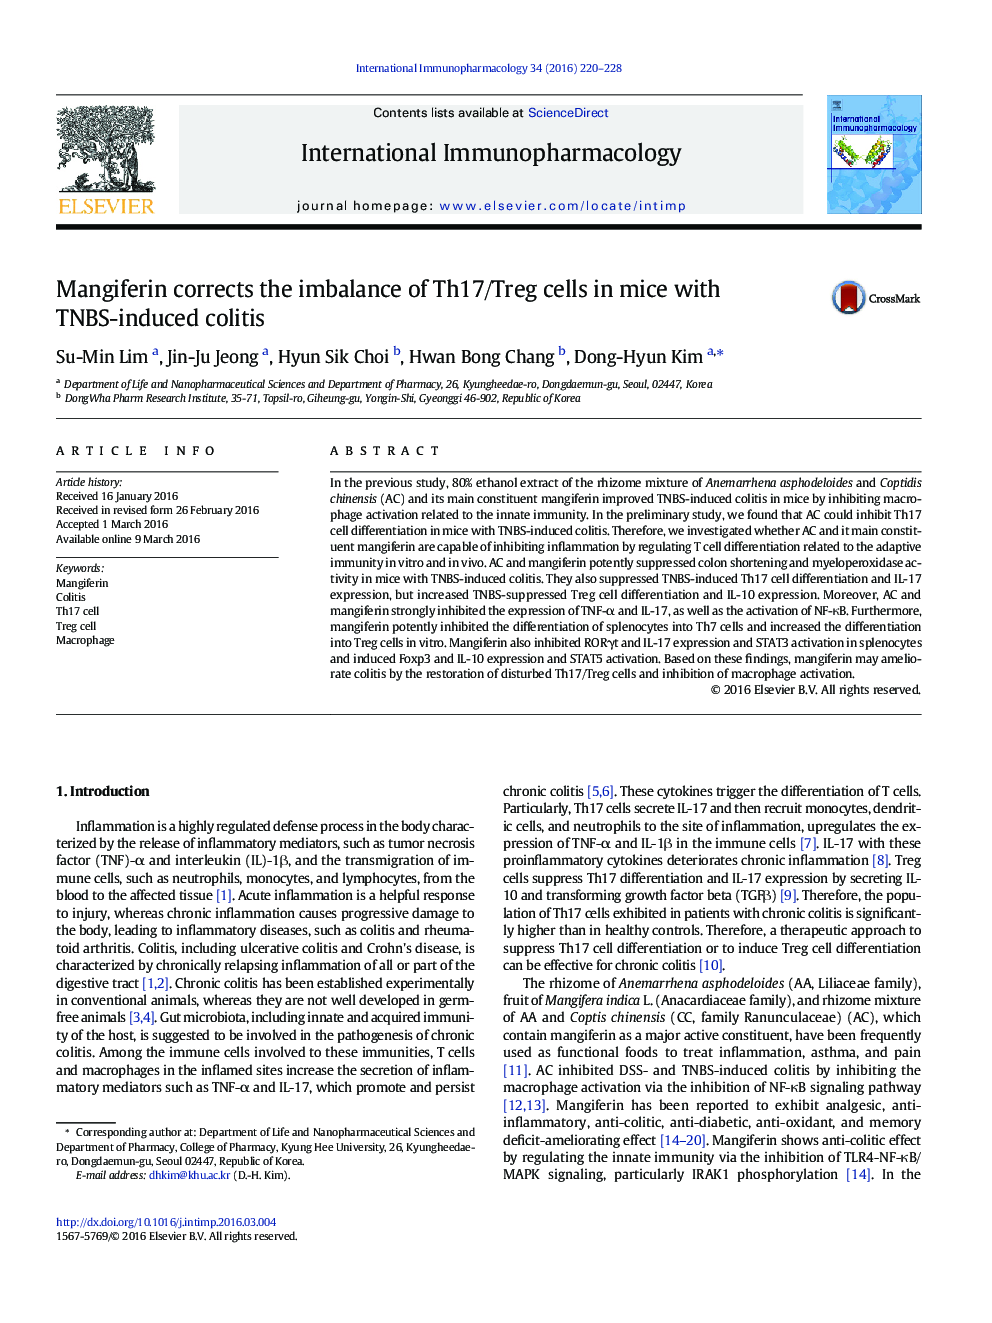 Mangiferin corrects the imbalance of Th17/Treg cells in mice with TNBS-induced colitis